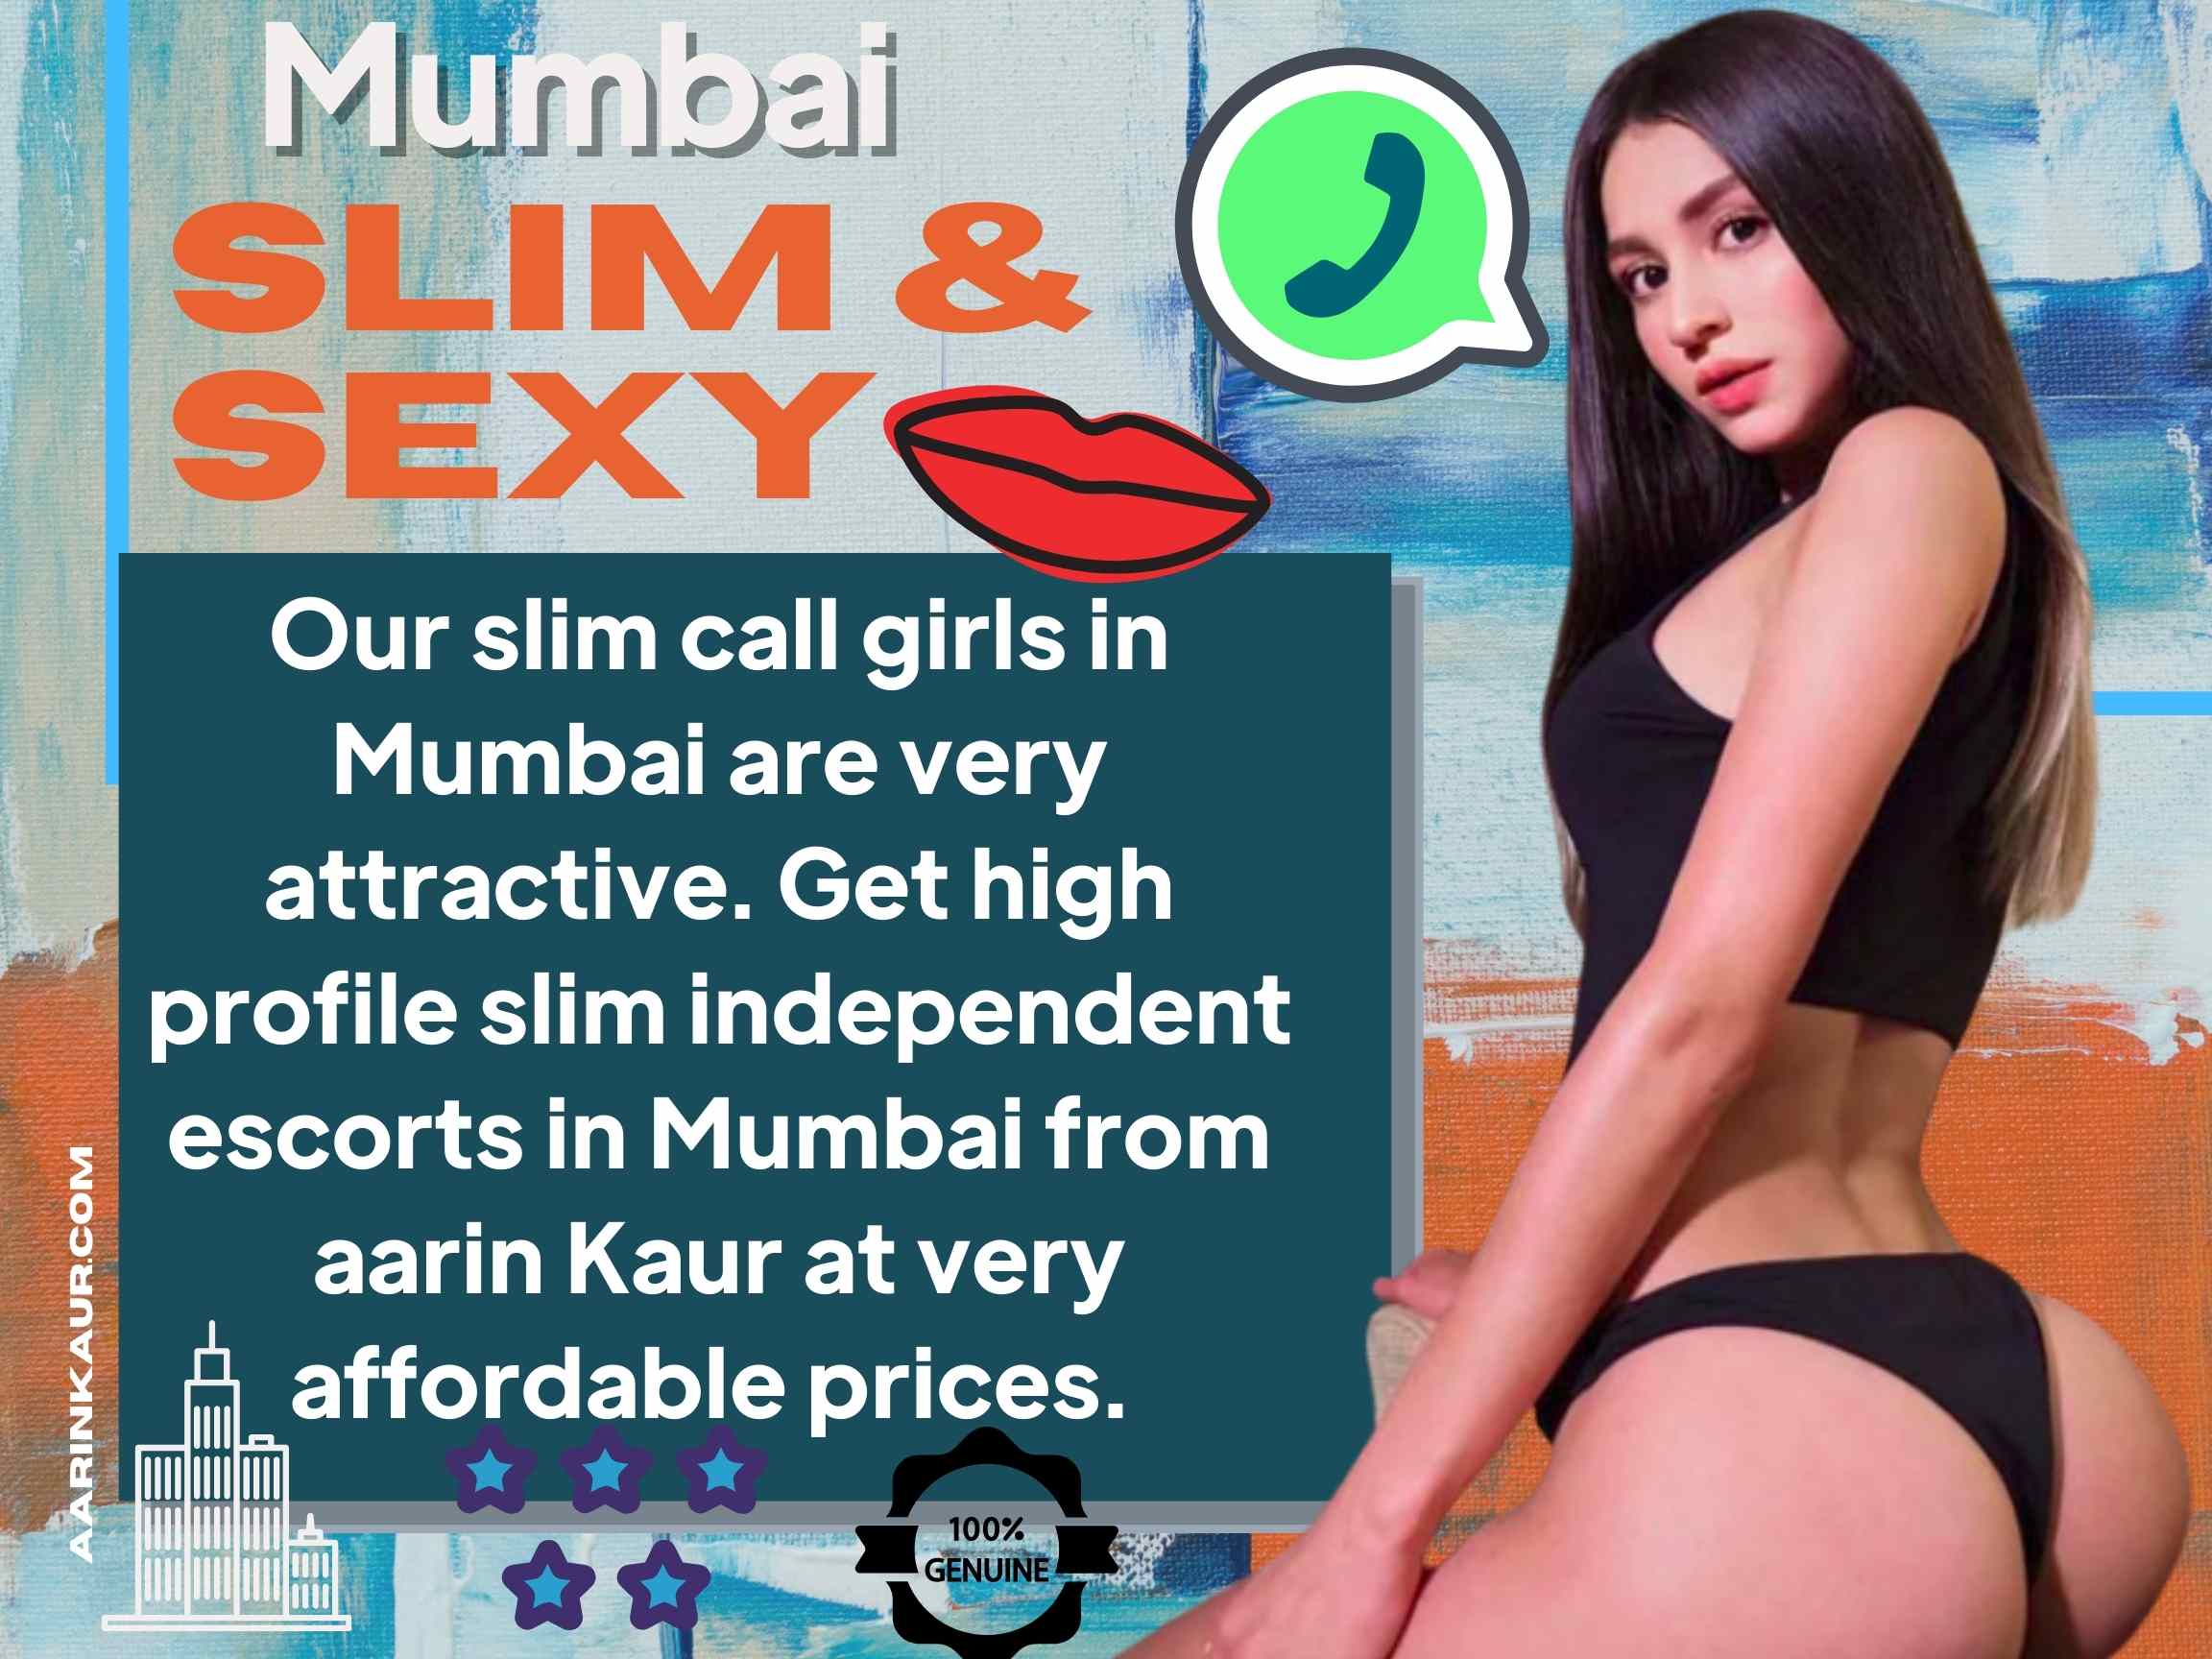 Slim and Sexy Escorts- Our slim call girls in Mumbai are very attractive. Get high profile slim independent escorts in Mumbai from aarin Kaur at very affordable prices. 